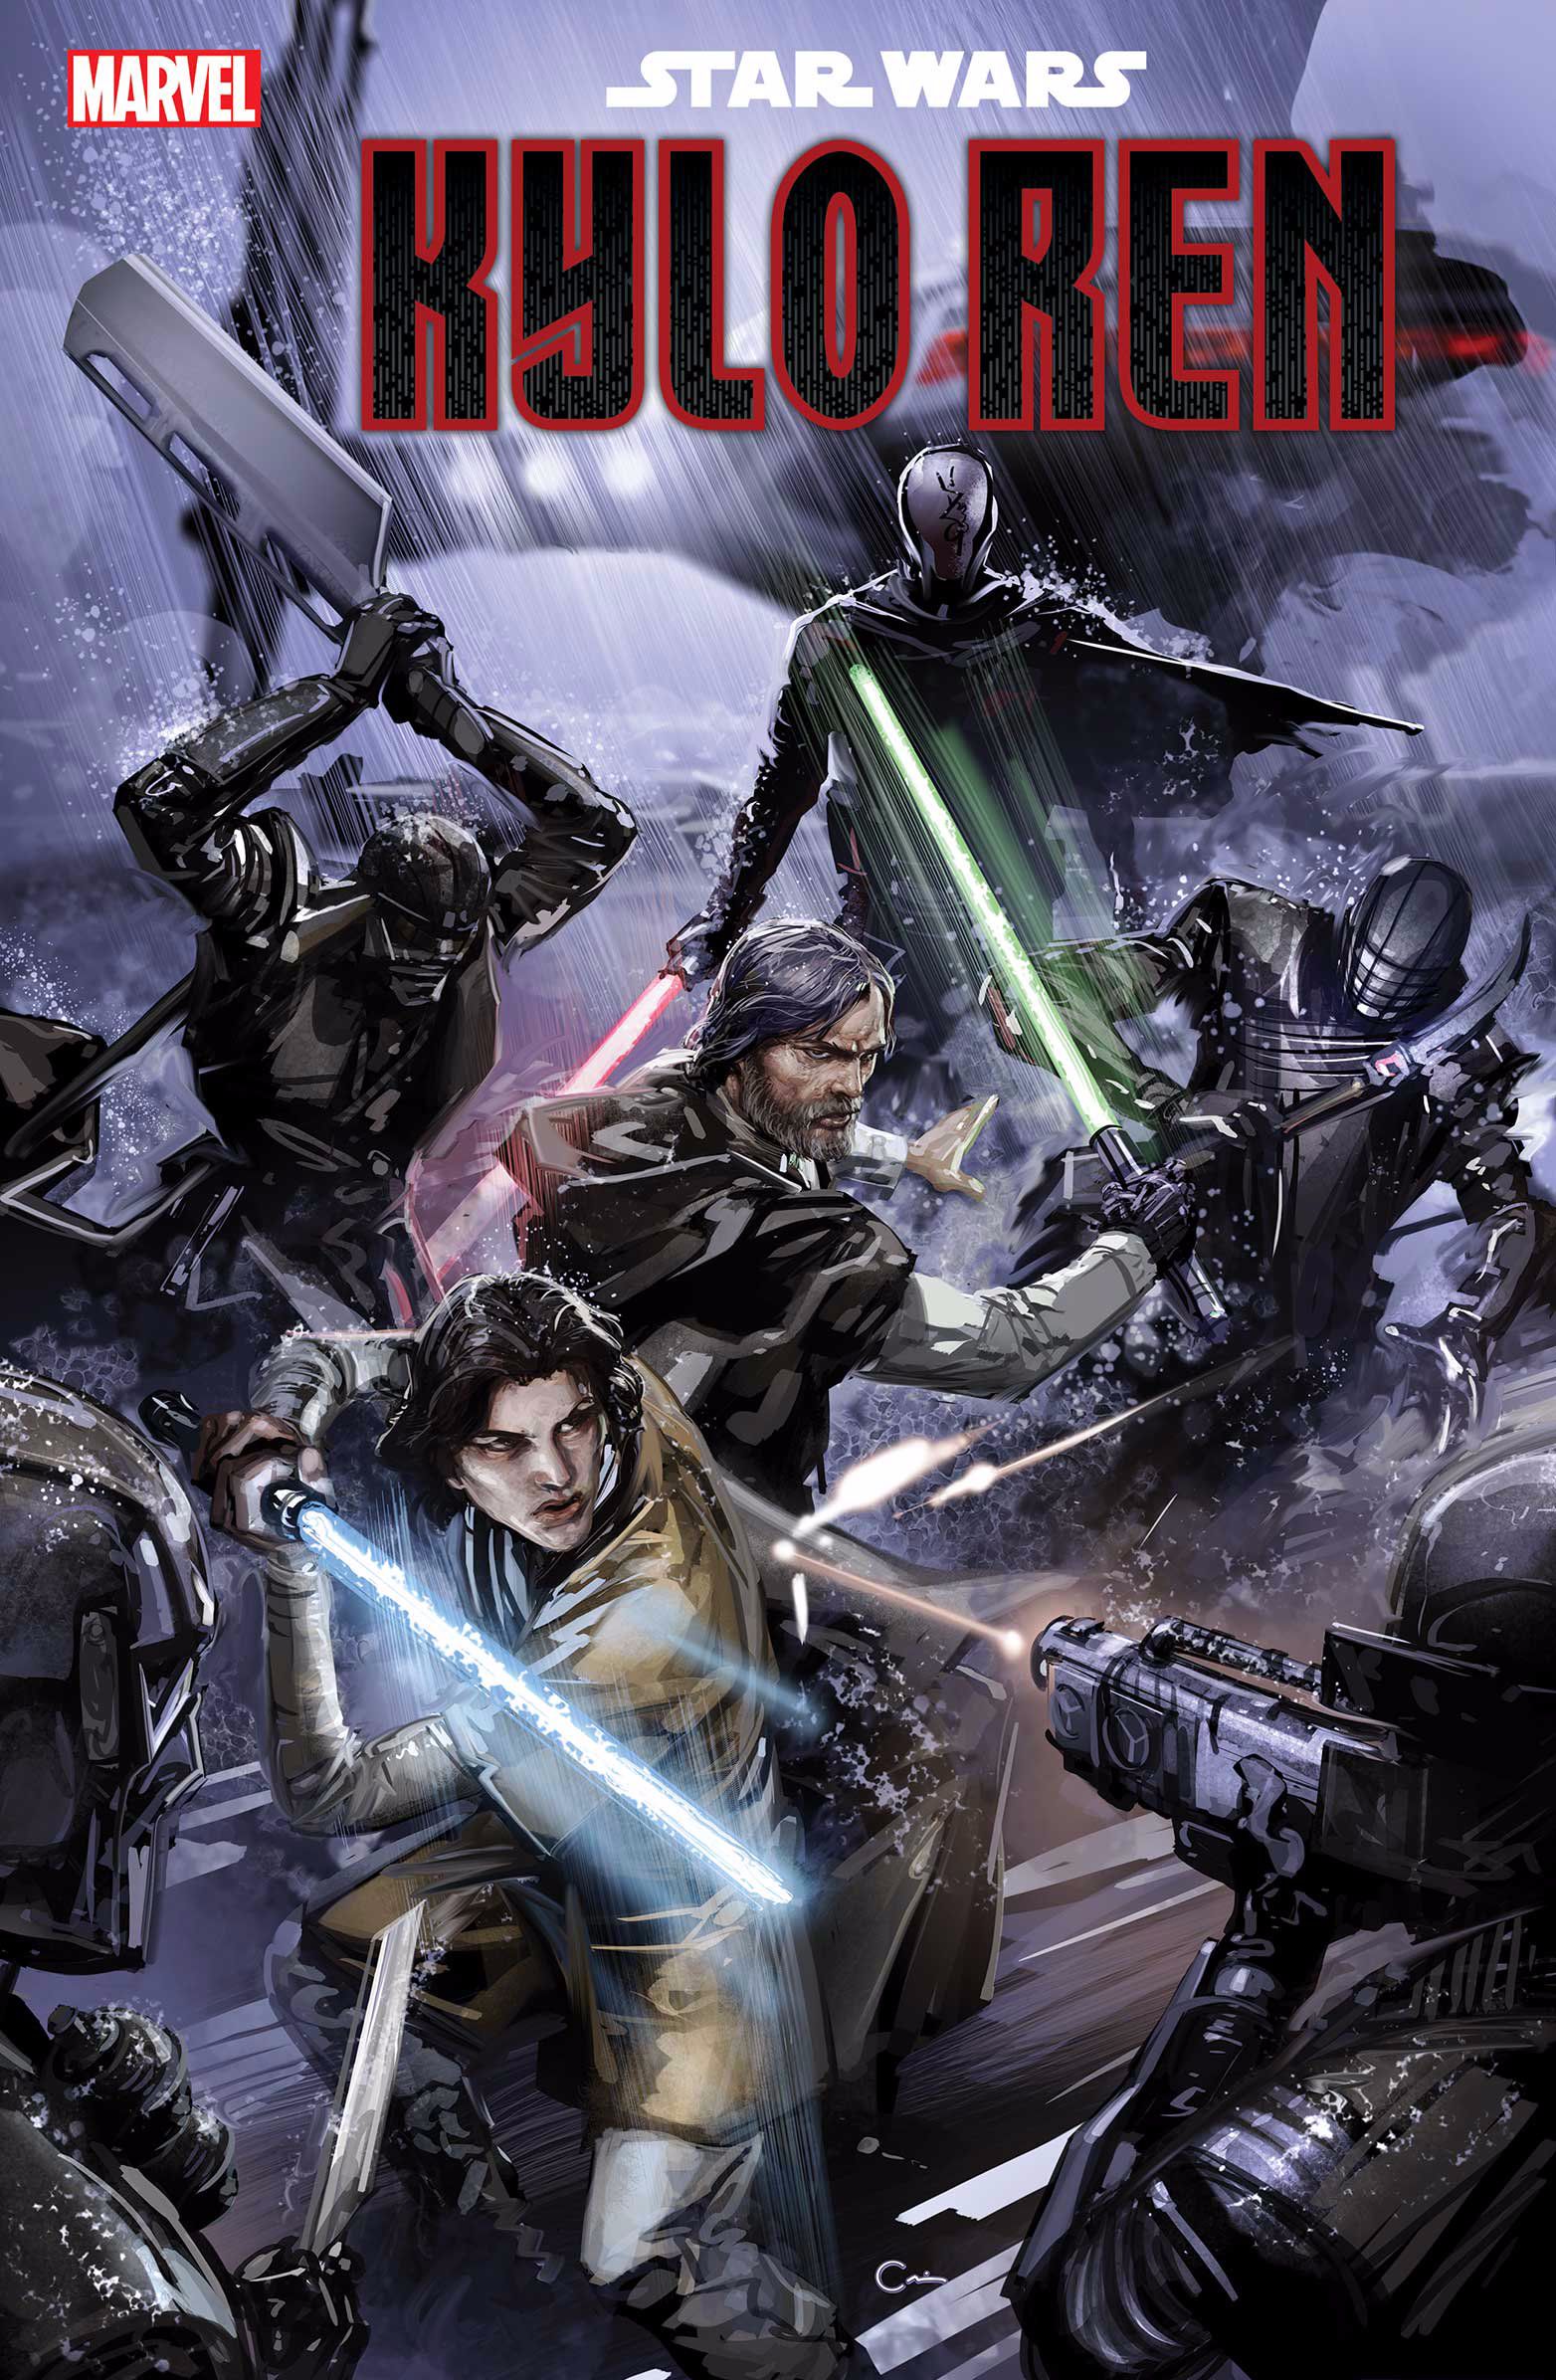 The Rise of Kylo Ren comic book cover